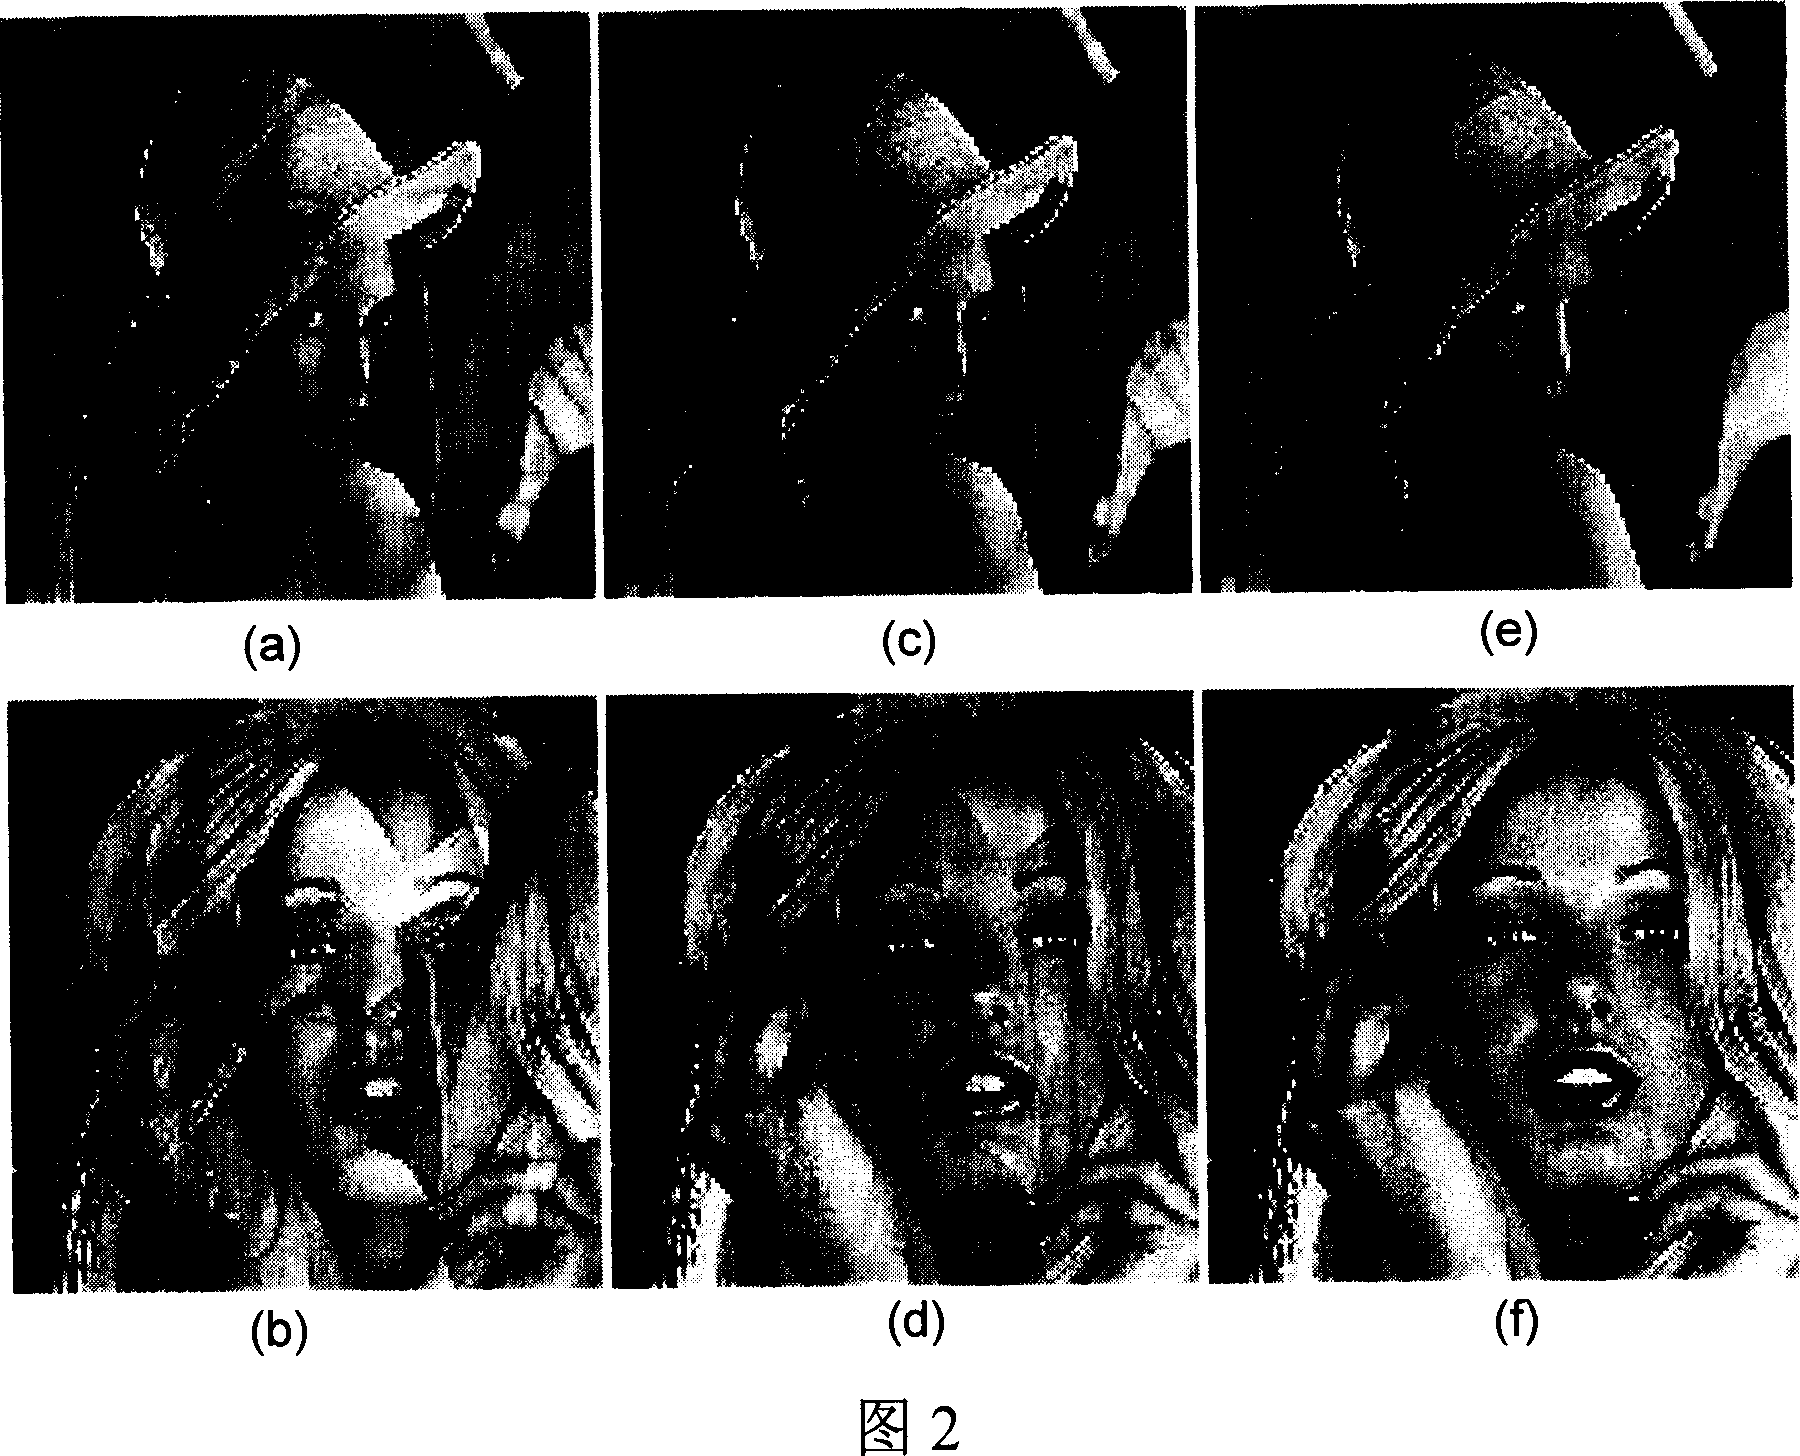 Initial method for image independent component analysis